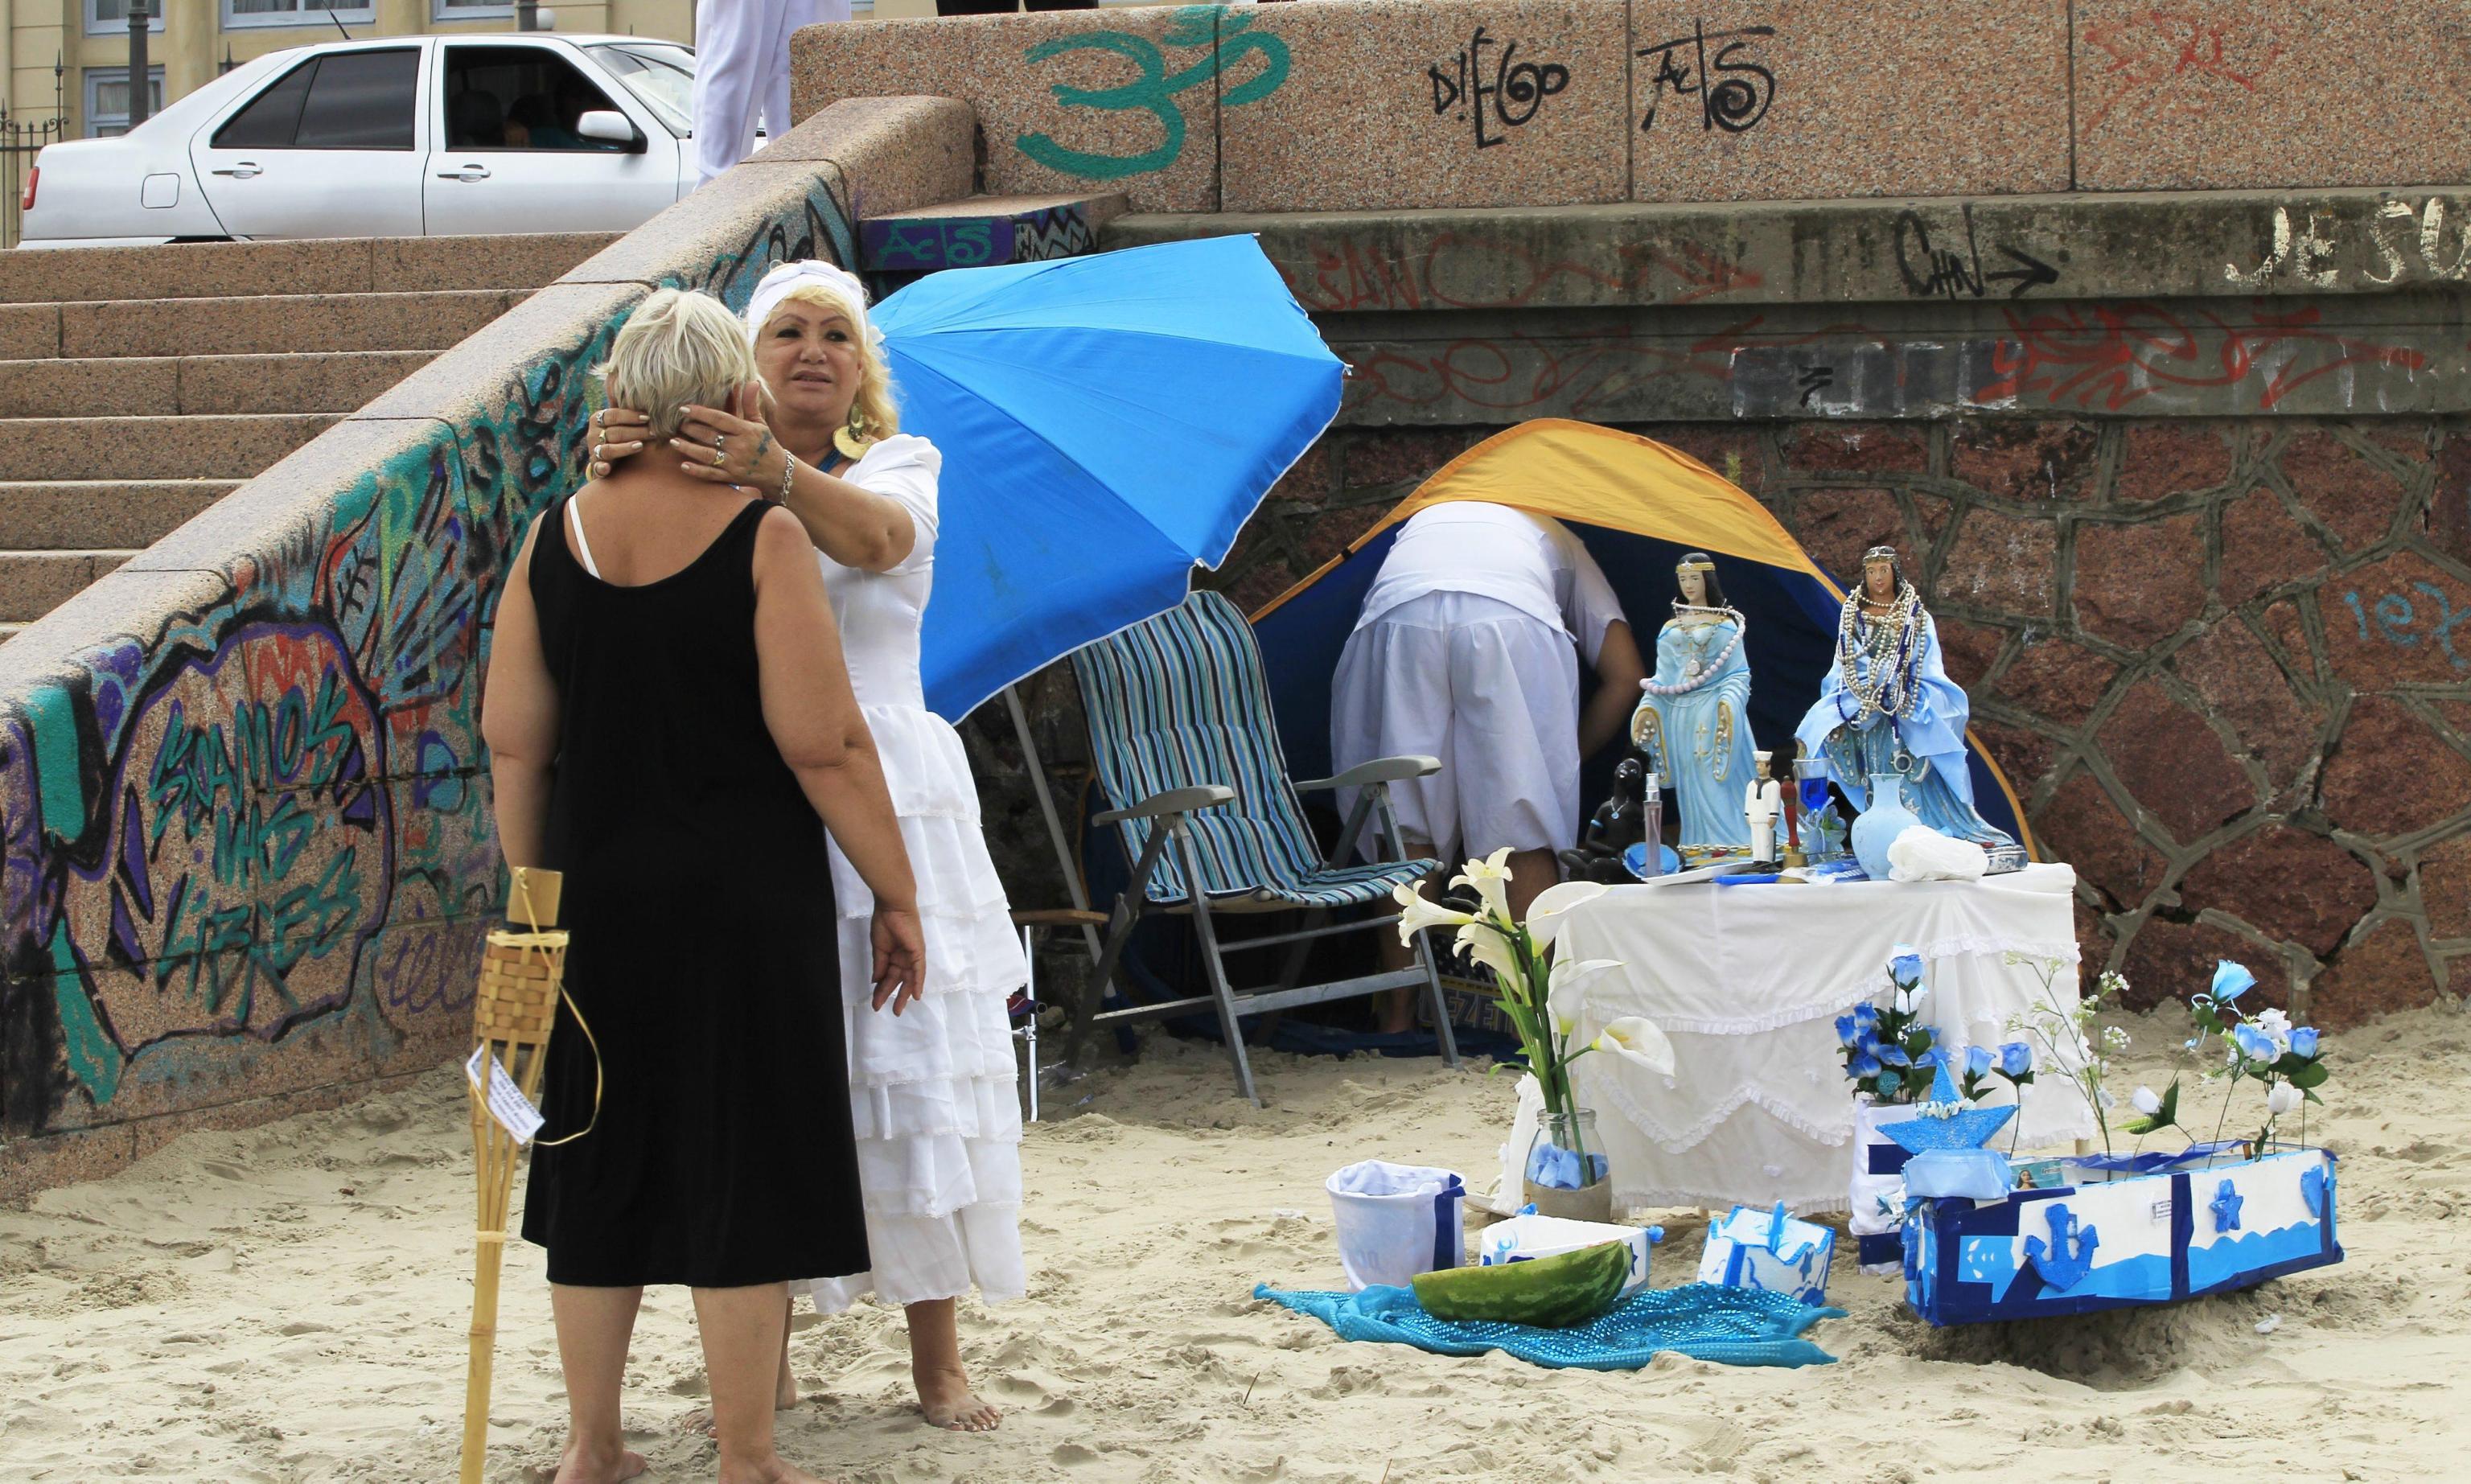 epa05766919 A woman takes part in the traditional Festivity of Iemanja, in a beach of Montevideo, Uruguay, 02 February 2017.'Iemanja' according to the Umbanda religion is the goddess of the sea.  EPA/Raul Martinez Pino